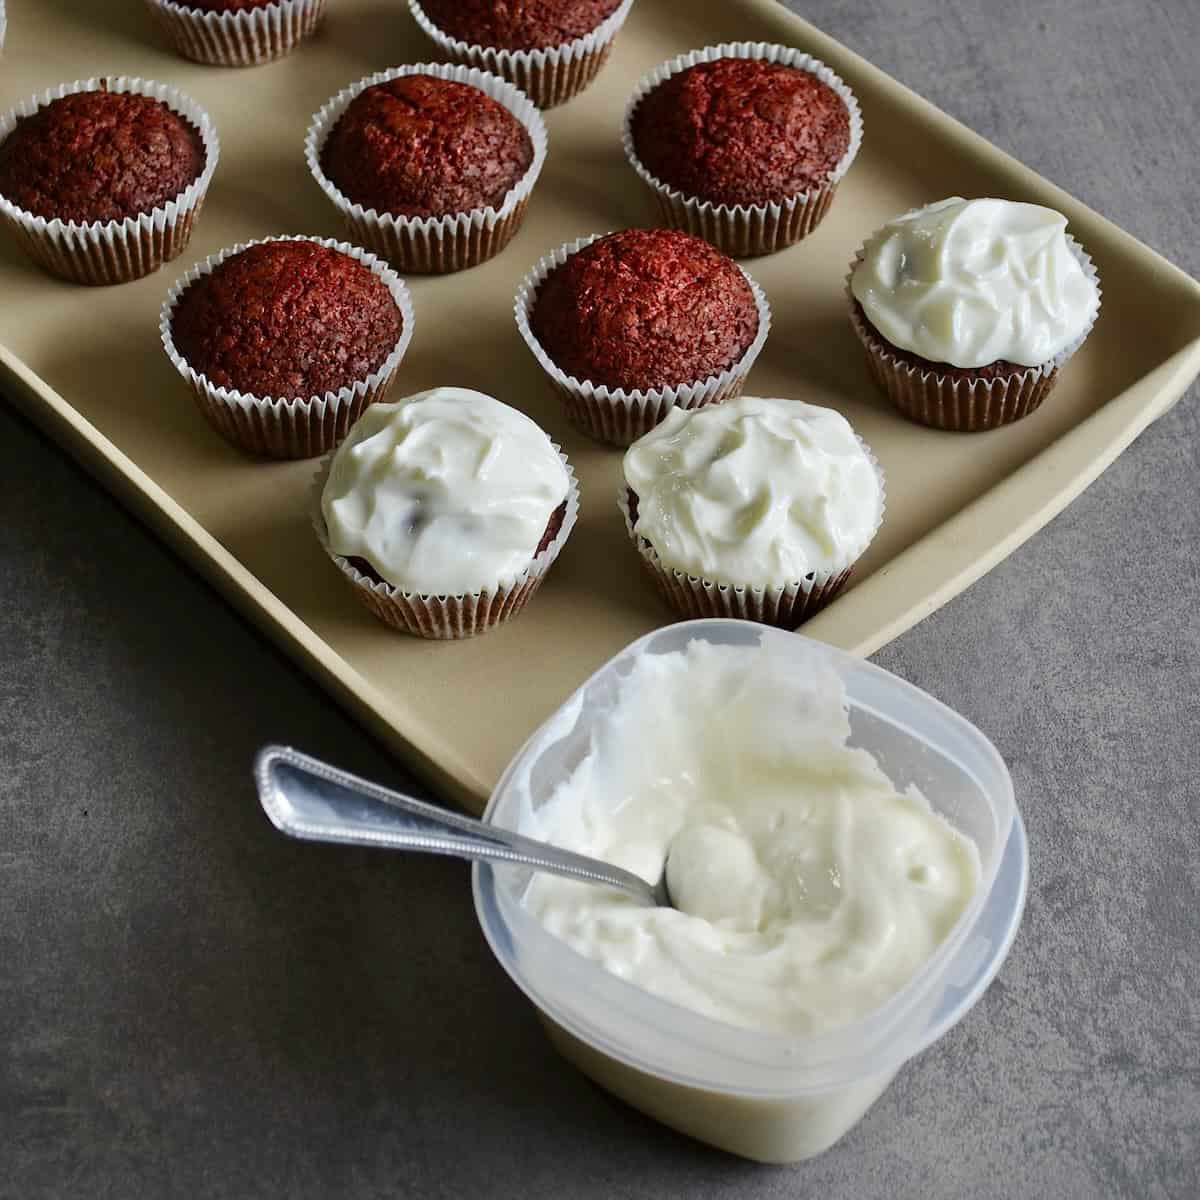 Cream cheese icing and cupcakes